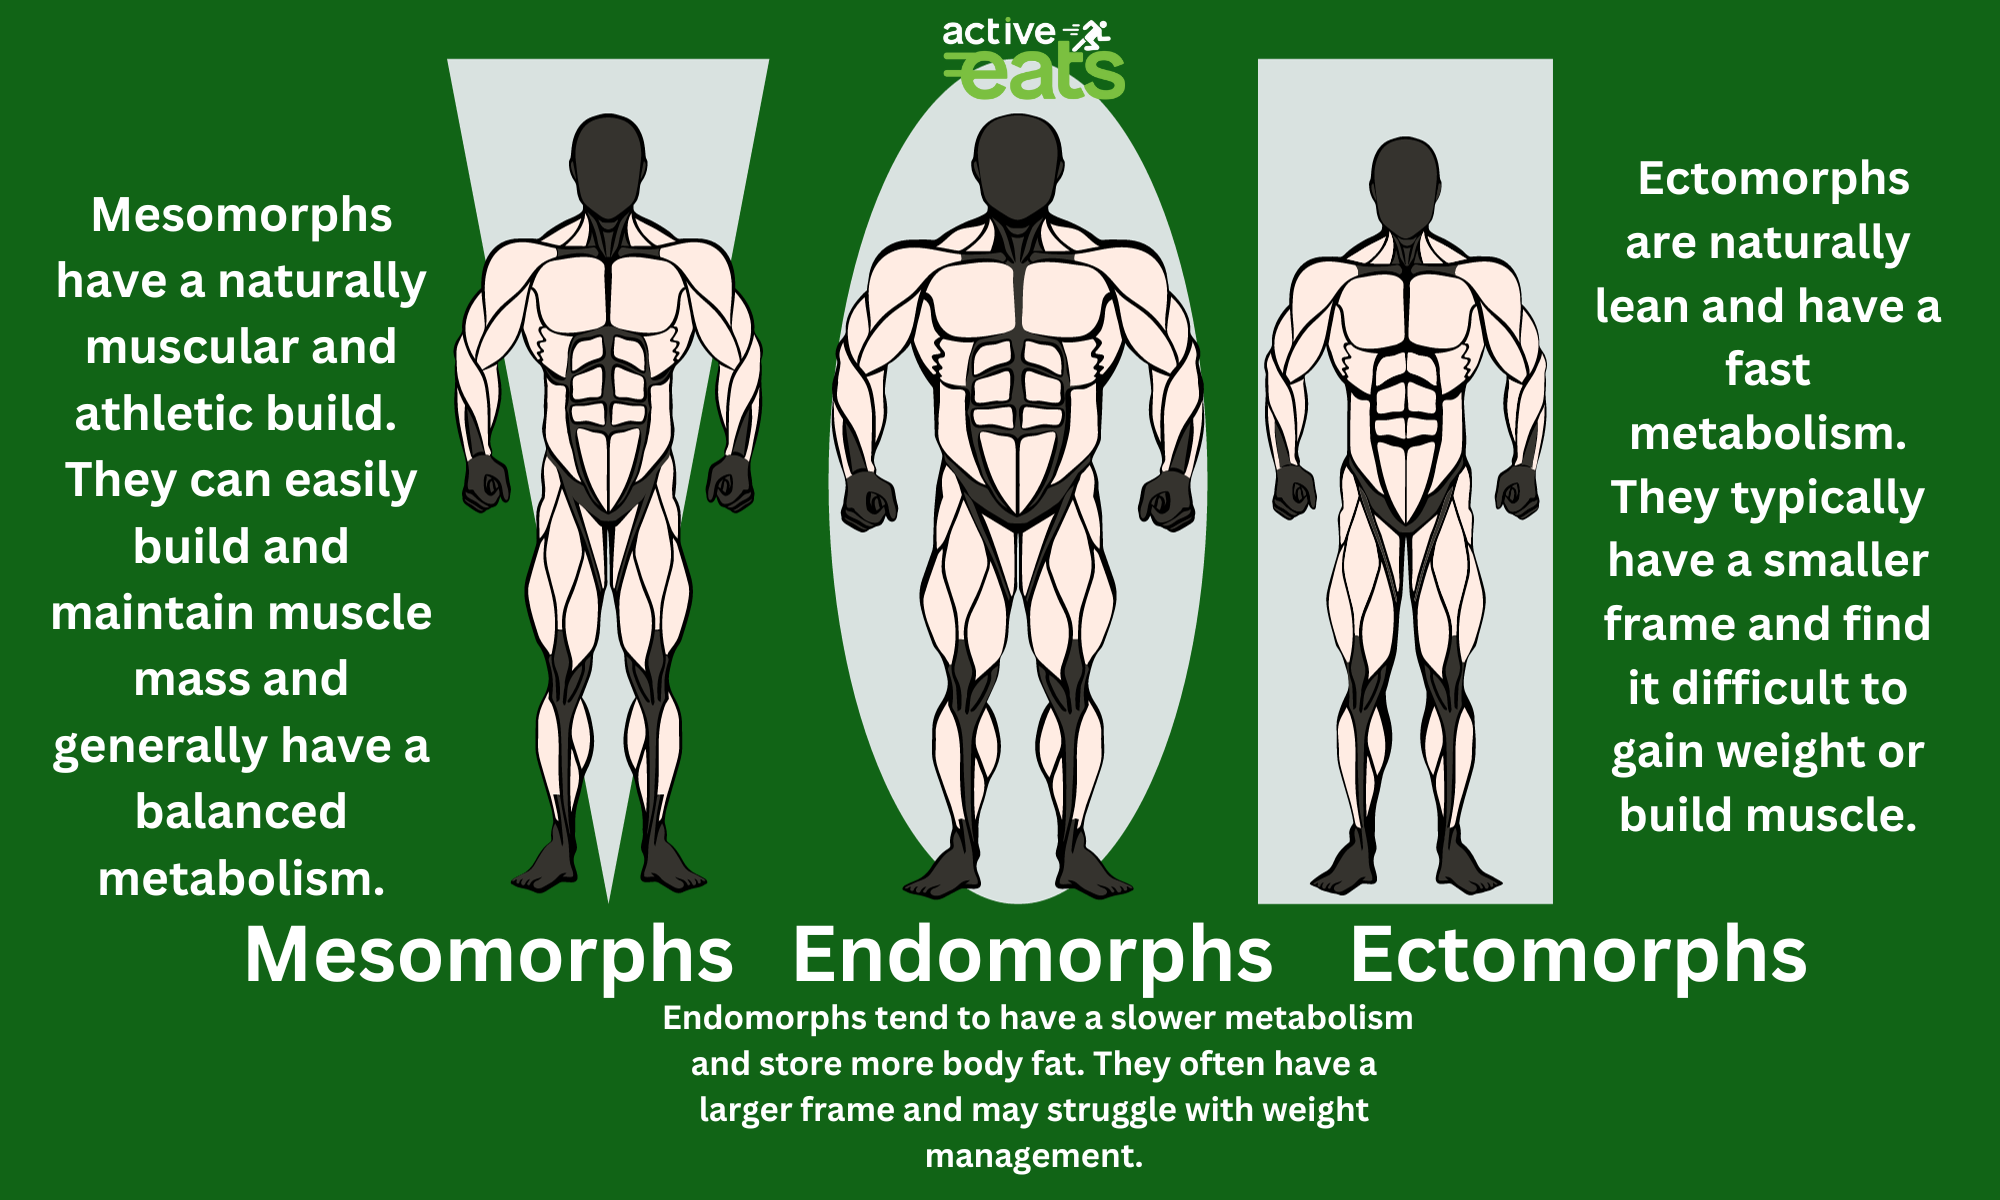 A visual representation of different body types: Mesomorph Body Type: An individual with a well-proportioned, muscular physique, characterized by broad shoulders and a narrow waist. Endomorph Body Type: A person with a softer, more rounded body shape, often having a higher body fat percentage and a wider frame, especially around the hips and midsection. Ectomorph Body Type: A slender and lean individual with a delicate build, featuring narrow shoulders and a faster metabolism, making it difficult to gain weight or muscle. This image helps to visually identify and understand the key characteristics of mesomorph, endomorph, and ectomorph body types.